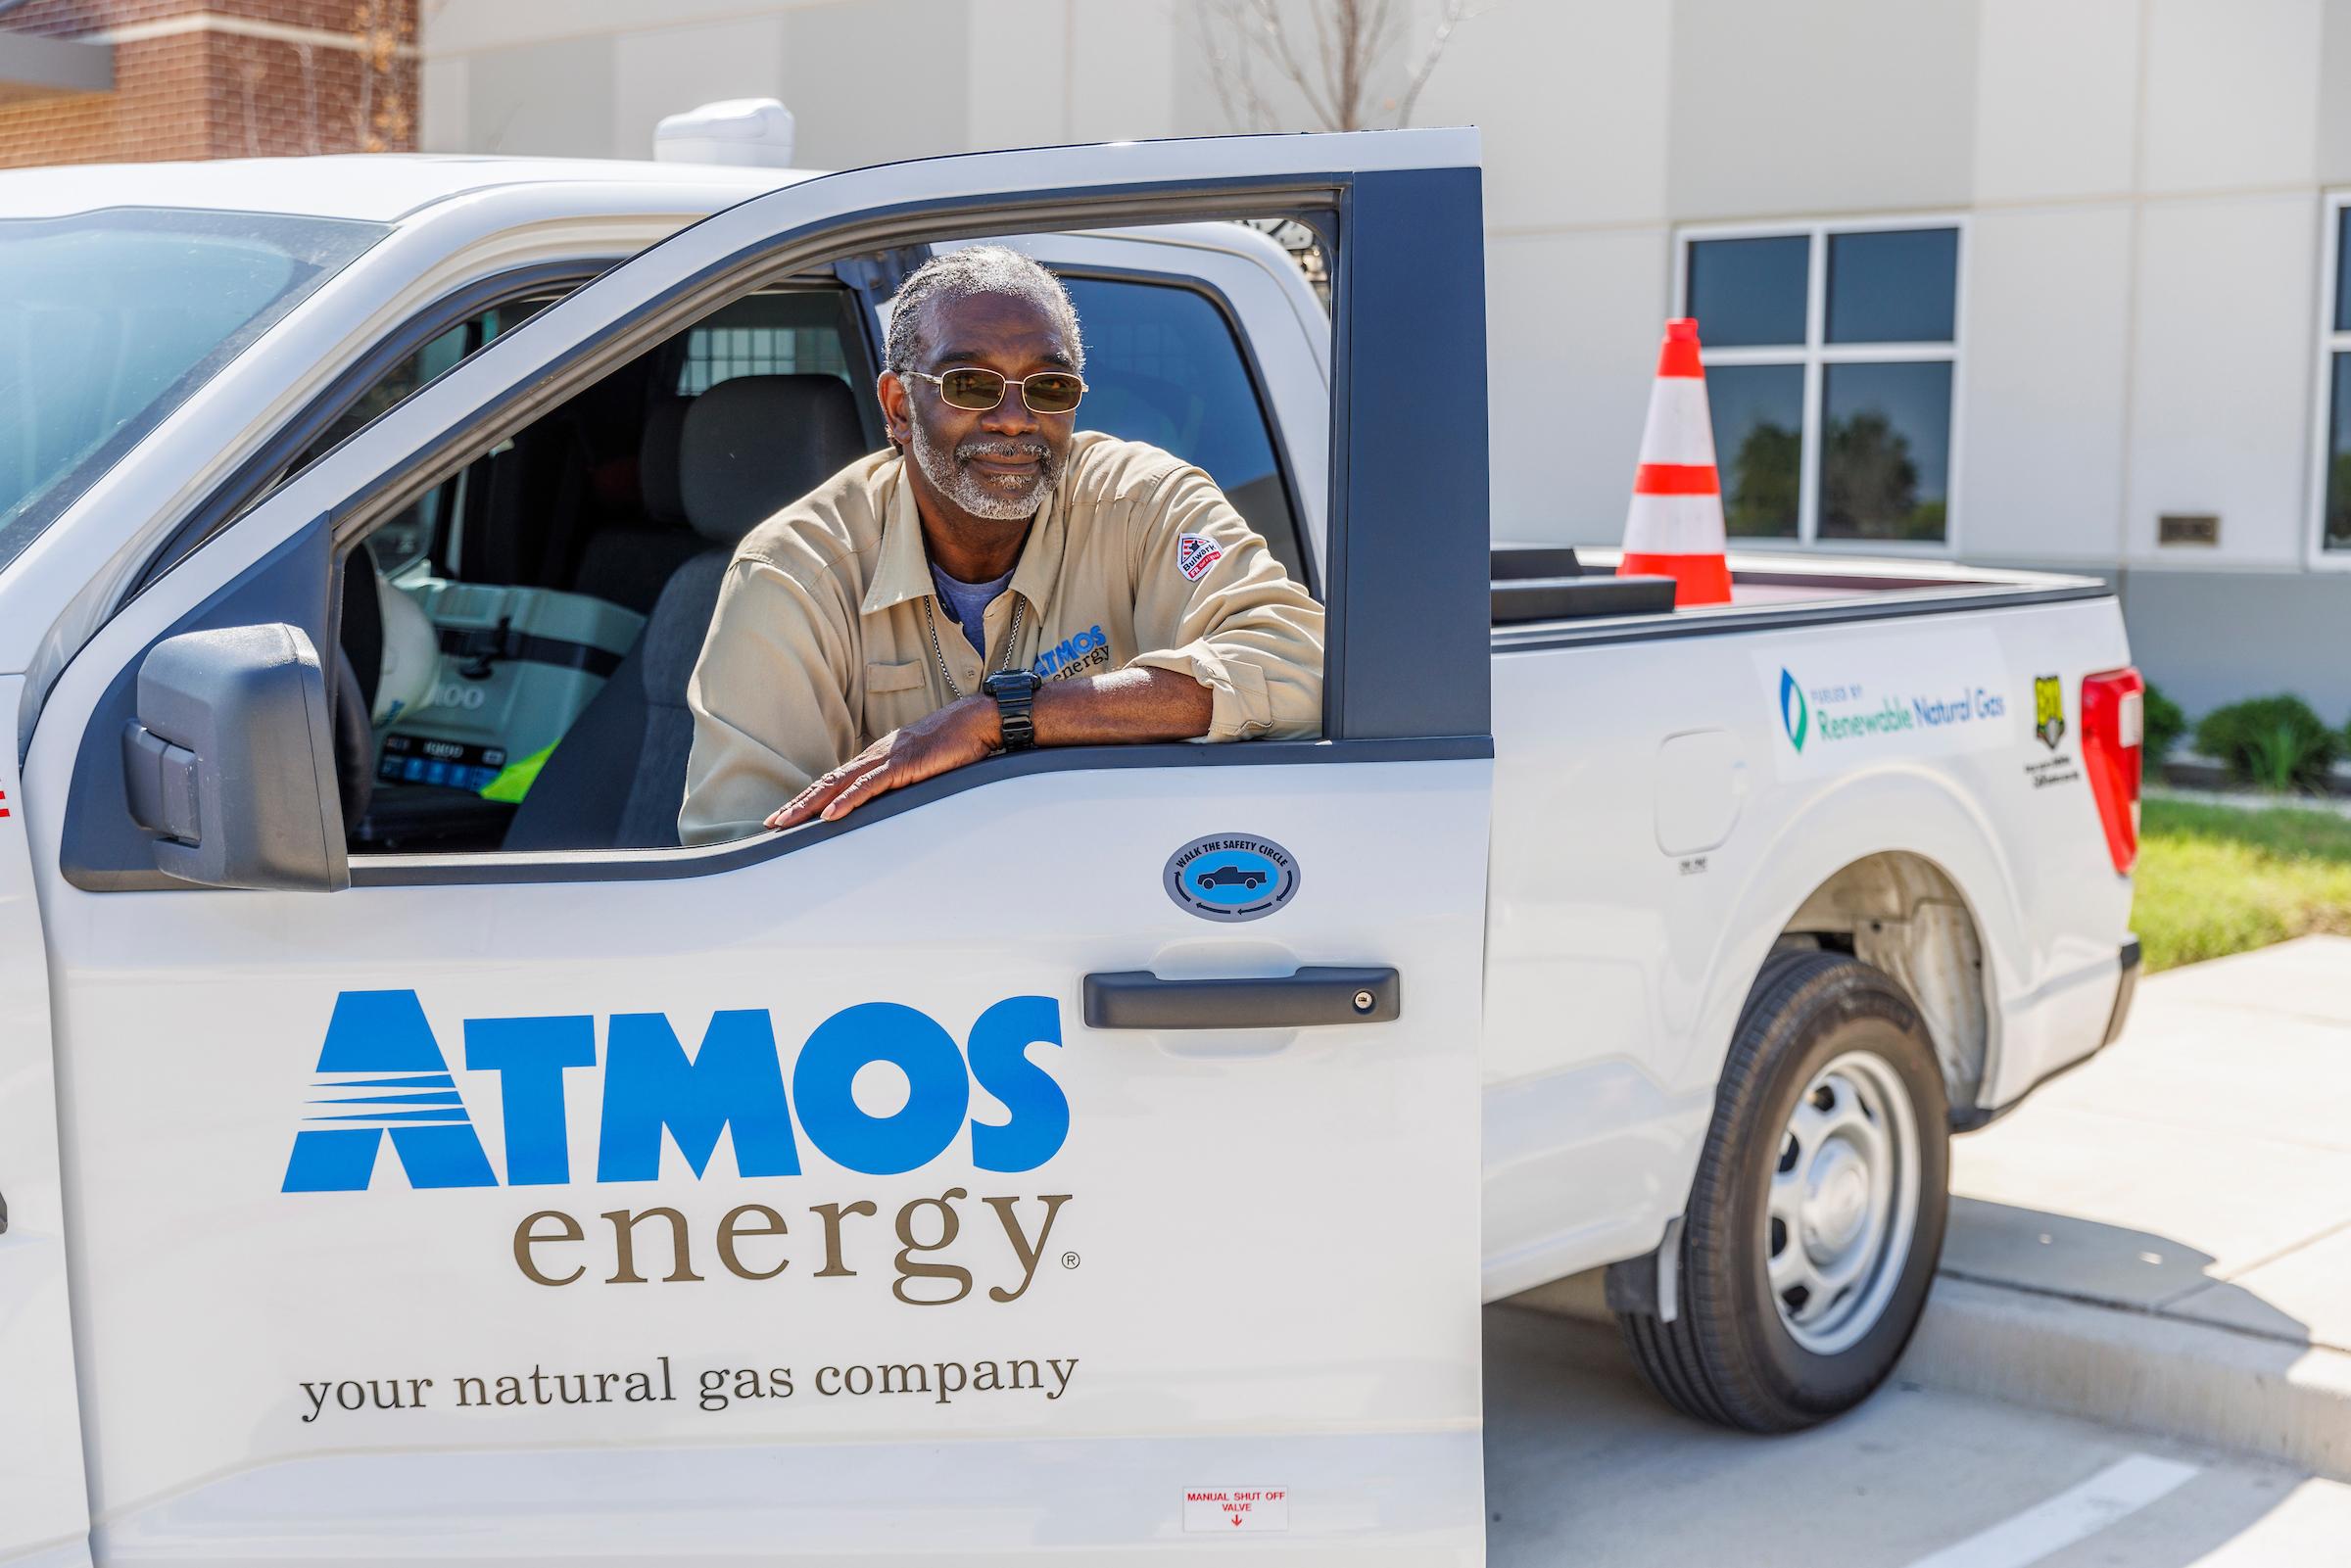 Atmos Energy Named to Newsweek’s “Most Trustworthy Companies in America” List